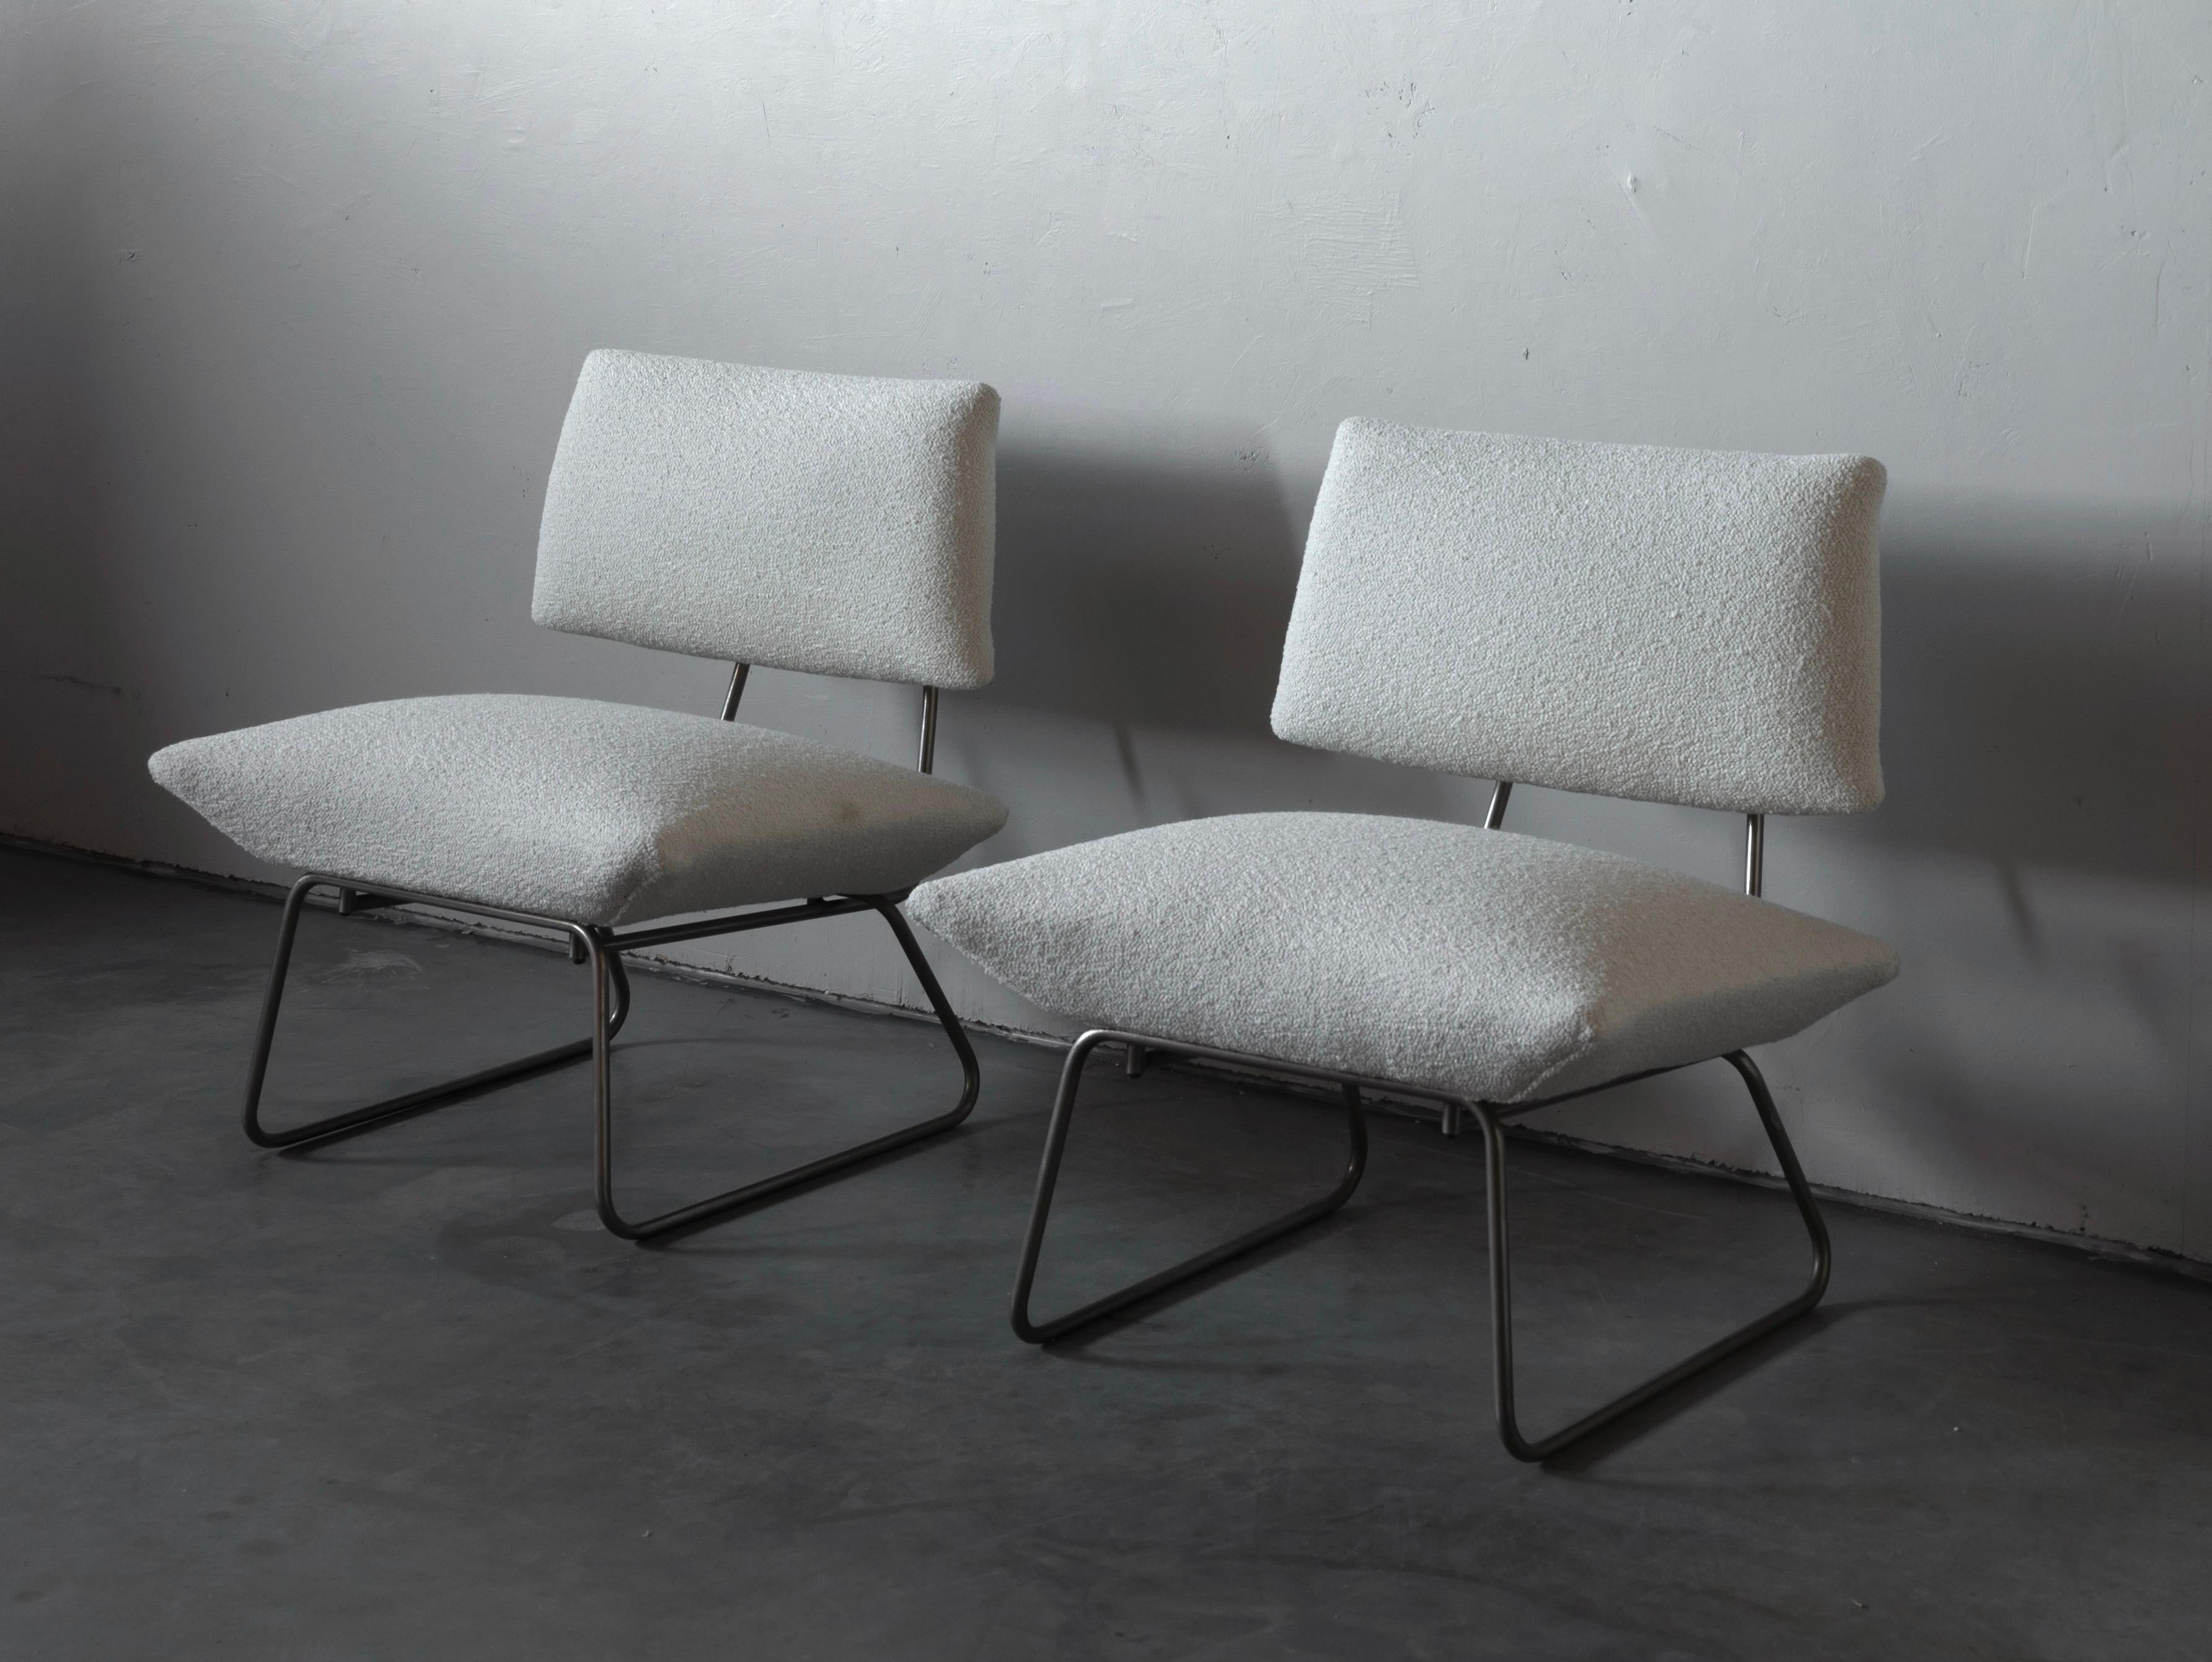 A pair of minimalist lounge chairs / slipper chairs. Designed by George Coslin Italy, 1960s. Metal frame supports overstuffed seat and back upholstered in it's original vintage fabric. Reupholstered in brand new high end bouclé